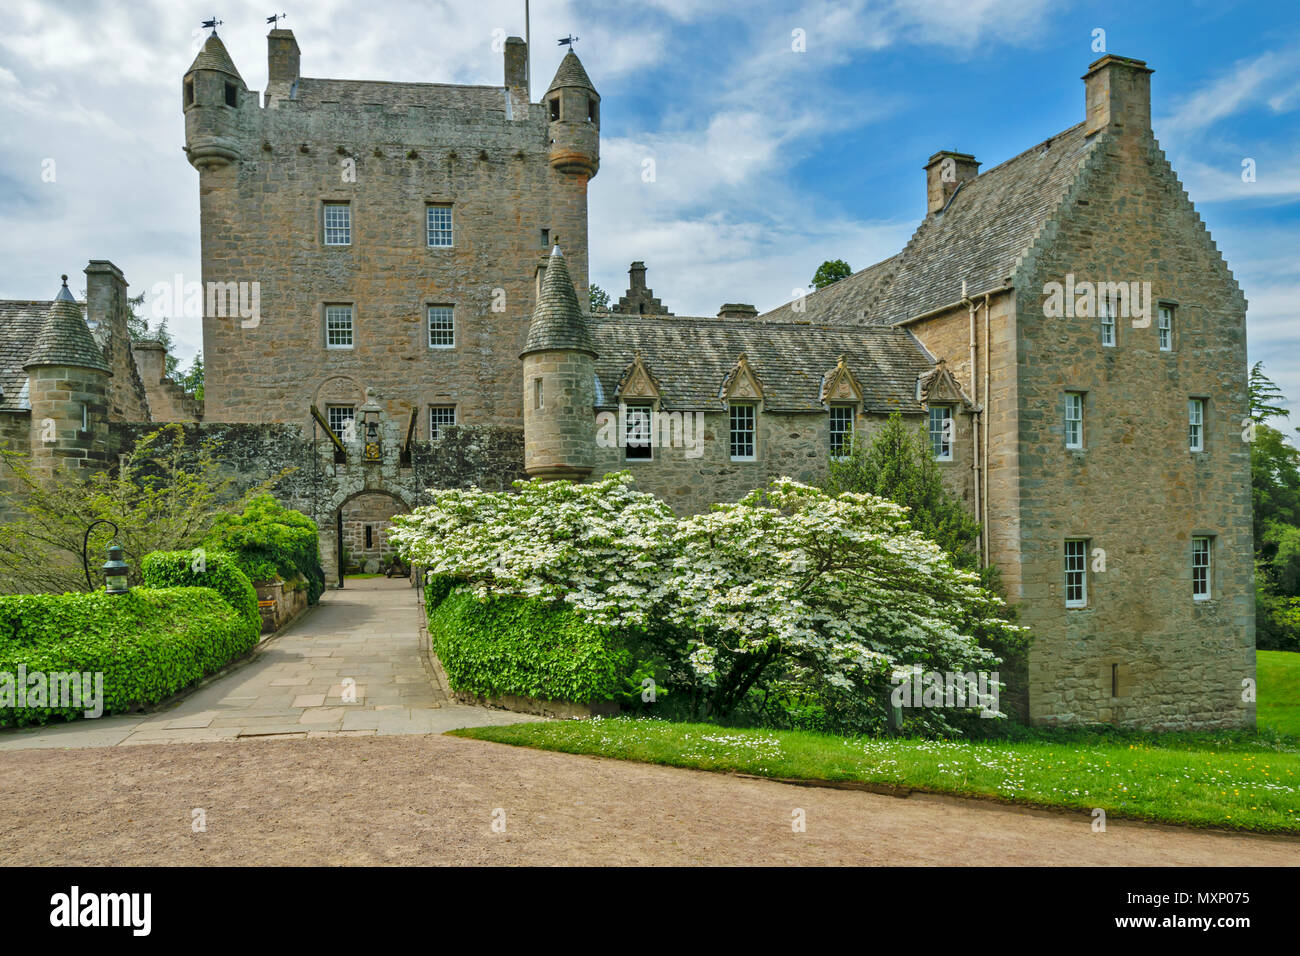 CAWDOR CASTLE NAIRN SCOTLAND THE MAIN BUILDING BRIDGE AND TOWER SHRUB WITH WHITE BLOSSOM IN SPRING Stock Photo